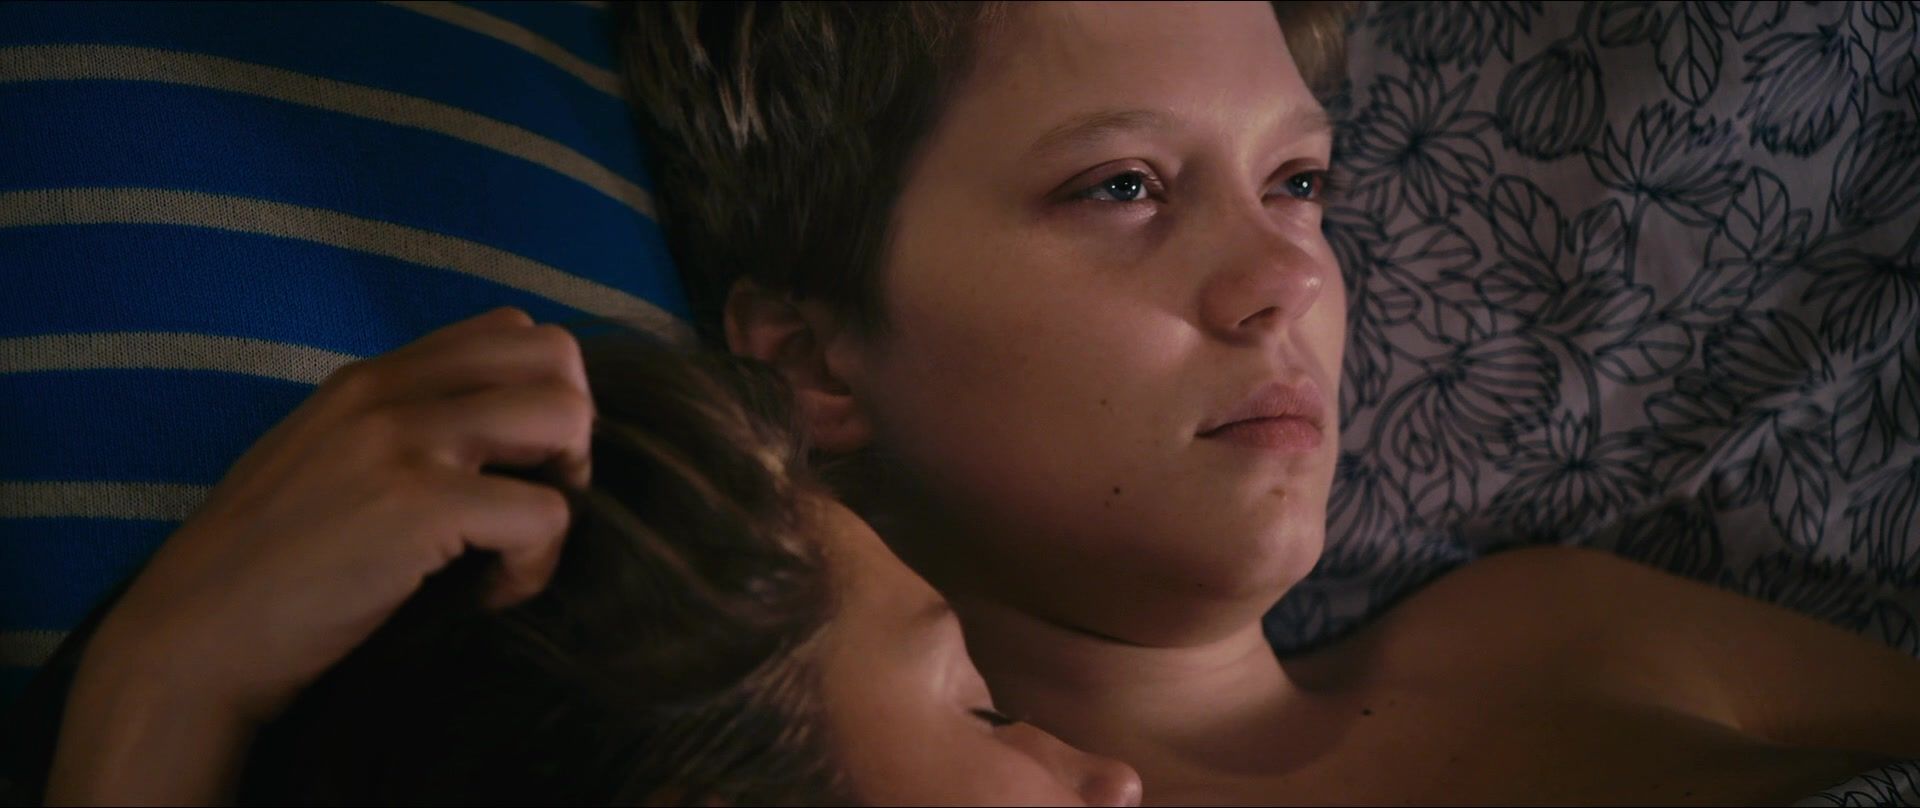 Hardcore Porn Best lesbian scene in movies | Adele Exarchopoulos nude & Léa Seydoux naked | The film "Blue Is The Warmest Color" (2013) GayLoads